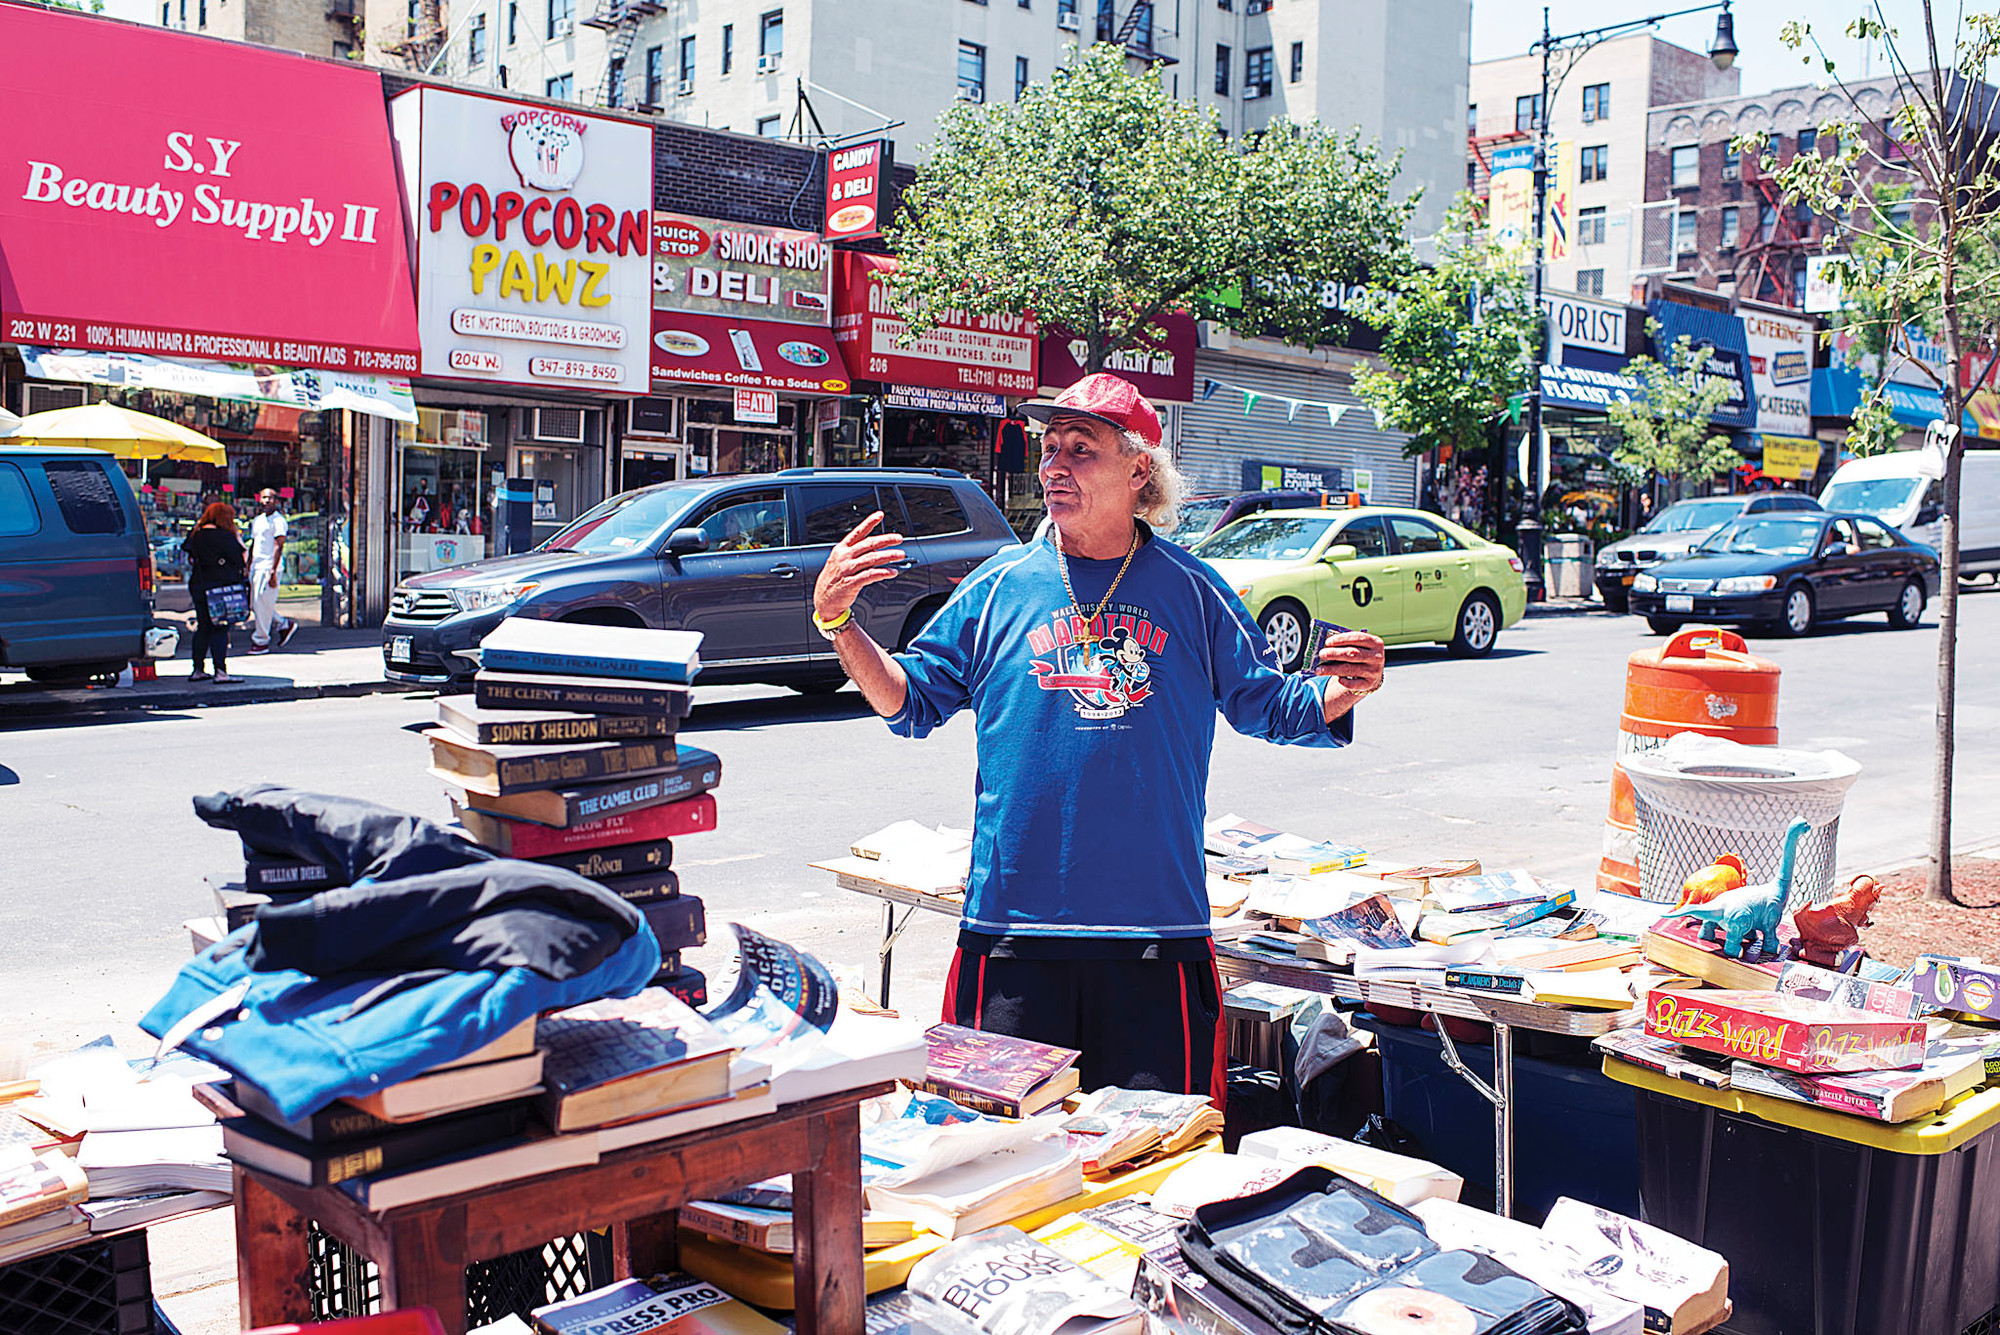 Vendor Peter Diego, 49, next to his book stand on West 231st Street.